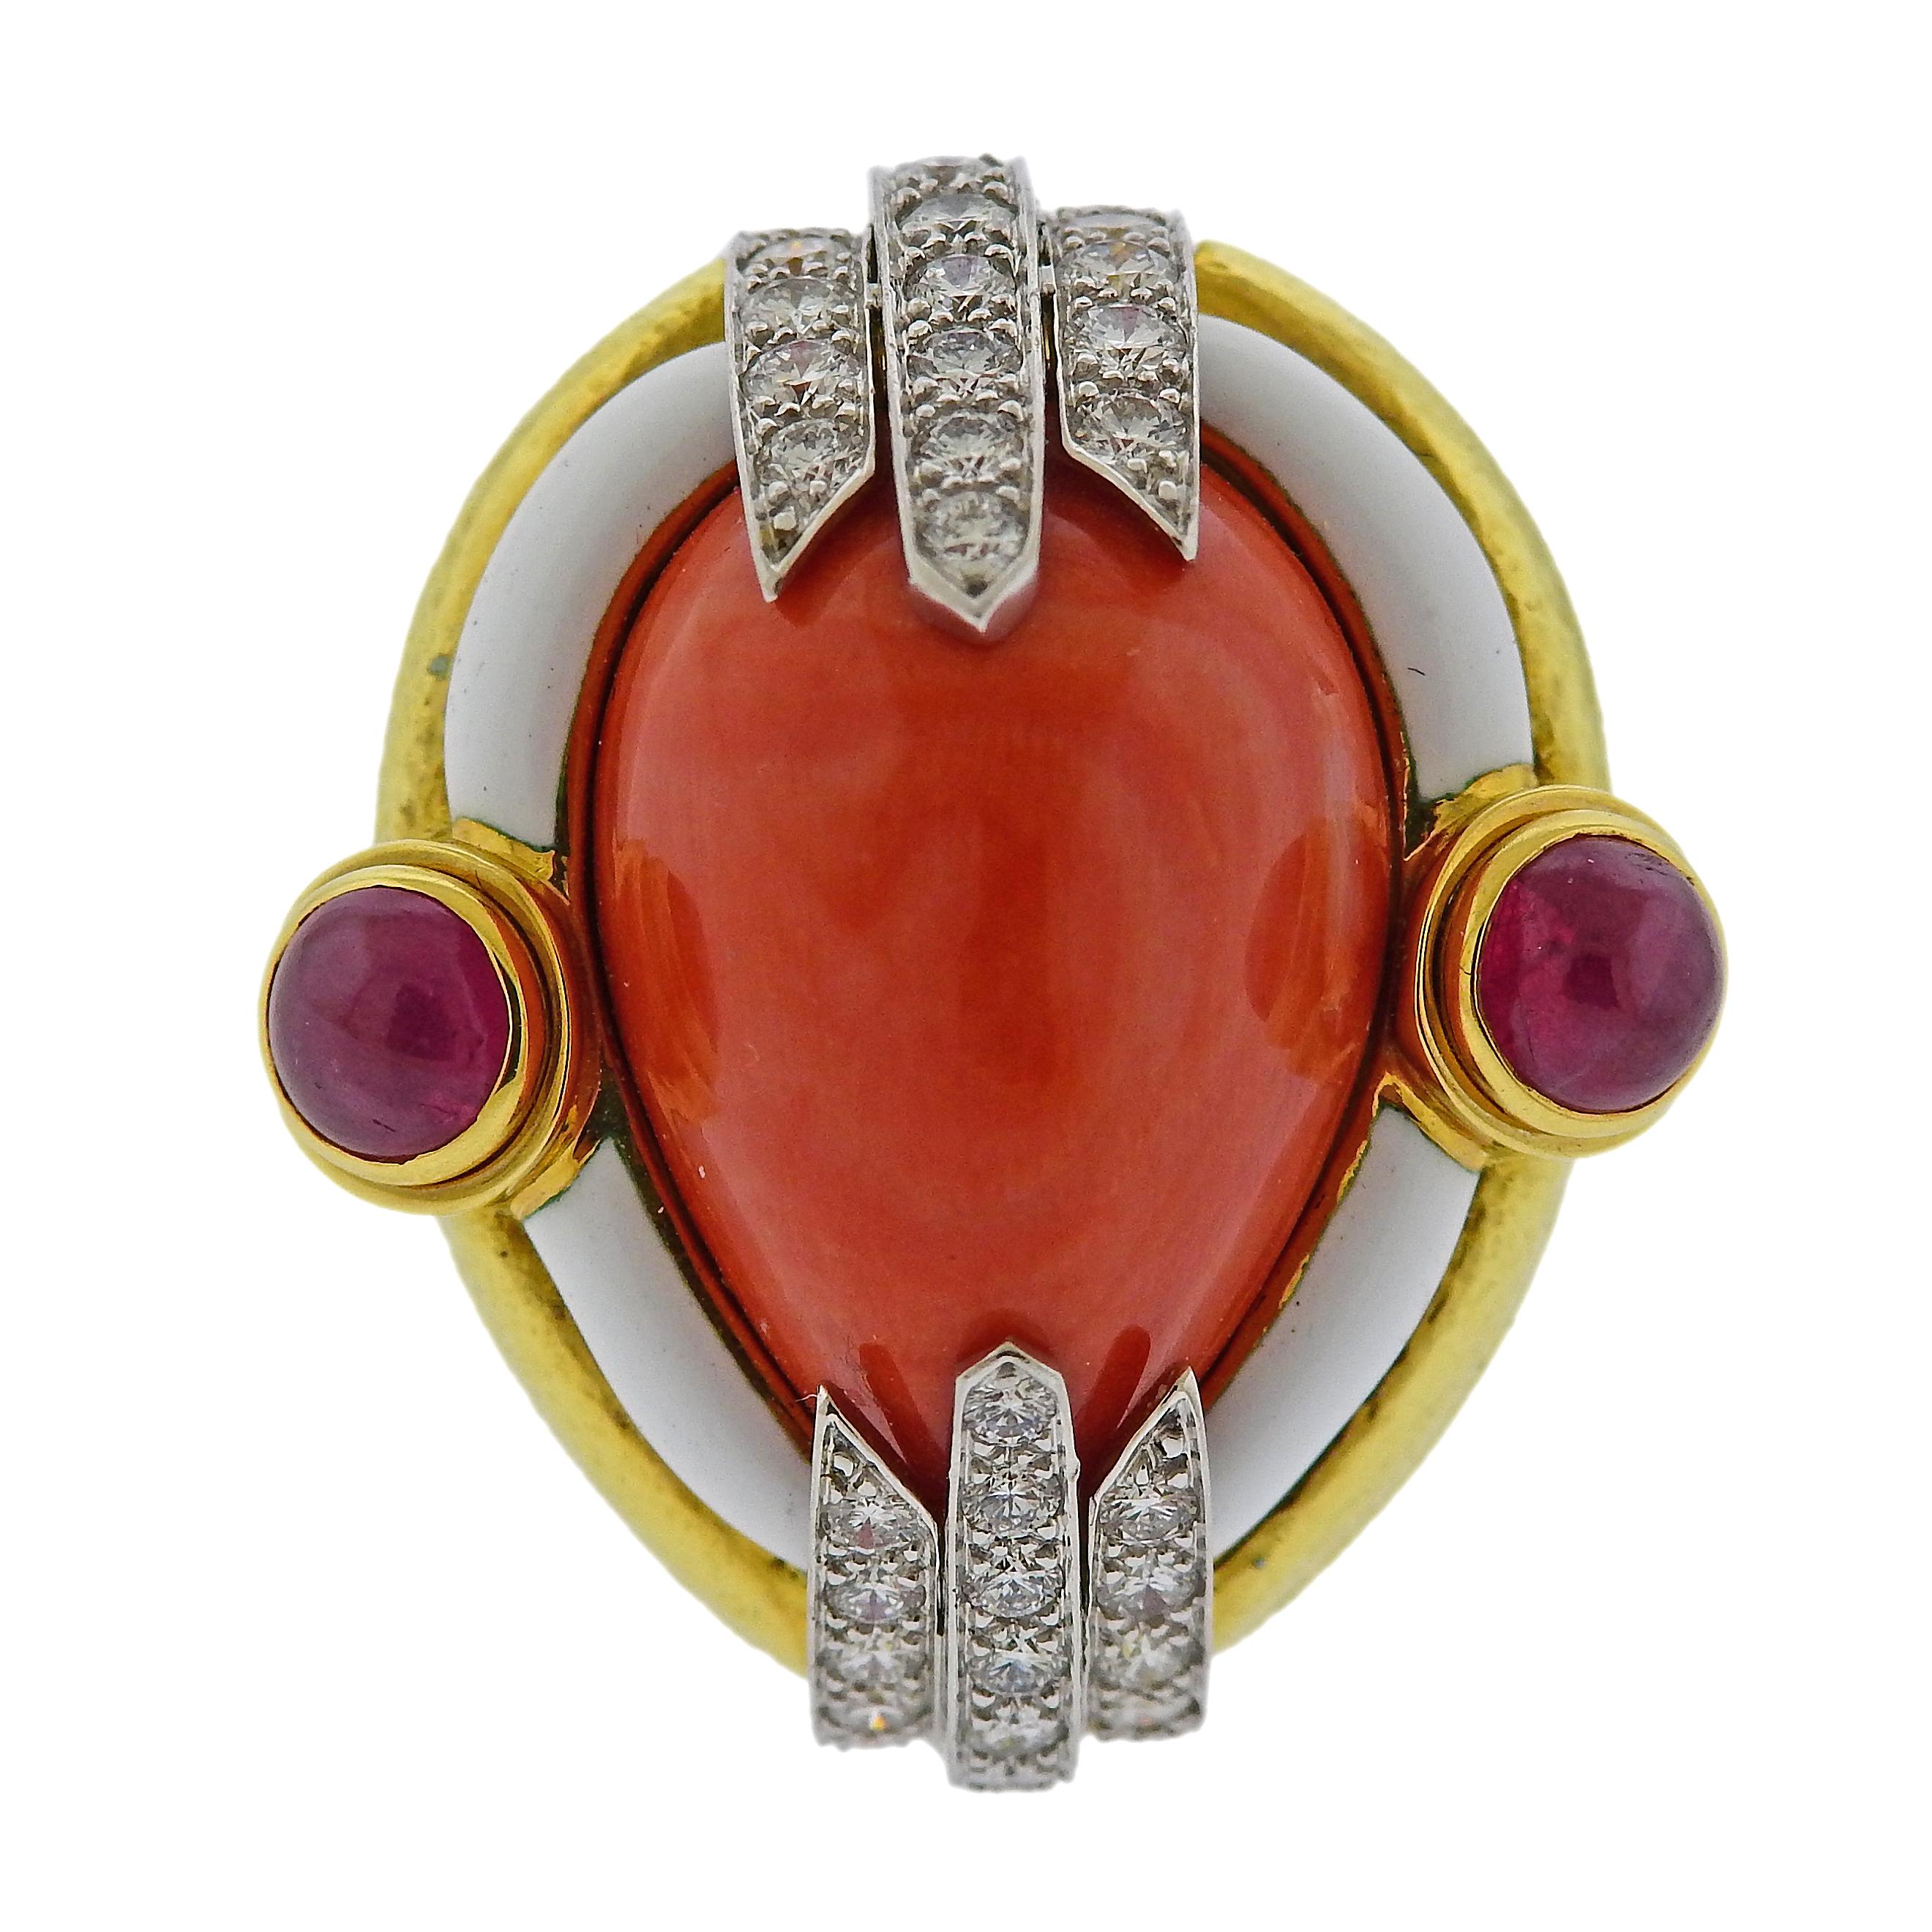 Imprssive 18k gold and platinum ring by David Webb, set with coral, approx. 1.50ctw in diamonds and ruby cabochons. Diamonds - 1.50ctw, Ruby 5.2mm, Coral 10.8mm x 14.5mm. Ring size is - 6, ring top measures 30mm x 27mm. Weight is 27.6 grams. David